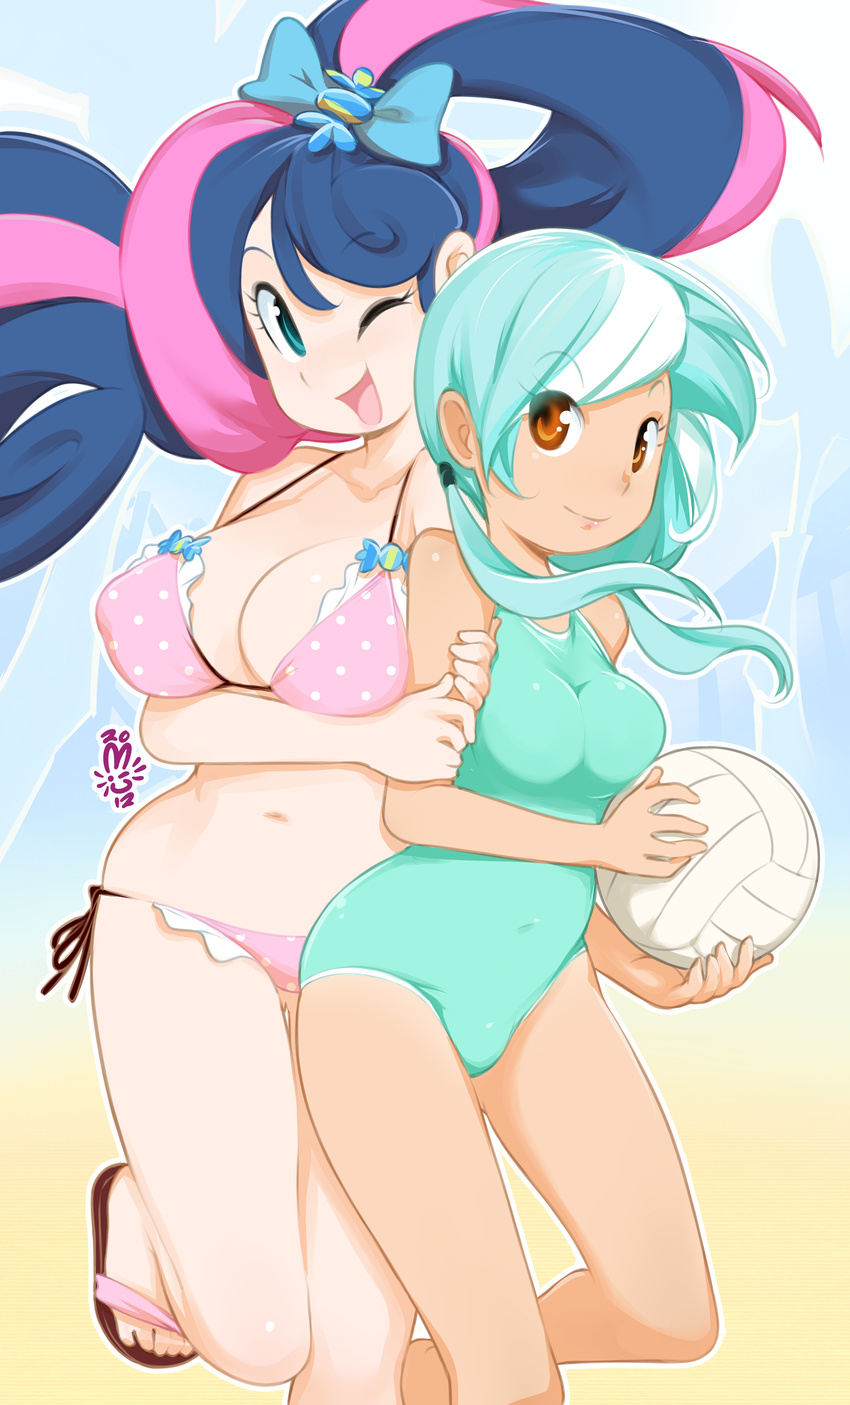 2013 2girls absurdres arm_grab ball bikini bon_bon bonbon_(my_little_pony) breasts cover cover_page green_eyes green_hair hair_ornament hair_ribbon highres holding large_breasts leg_up long_hair lyra_heartstrings multicolored_hair multiple_girls my_little_pony my_little_pony_friendship_is_magic one-piece_swimsuit one_leg_up personification ponytail ribbon sandals slippers smile swimsuit twintails two-tone_hair very_long_hair volleyball wink yellow_eyes